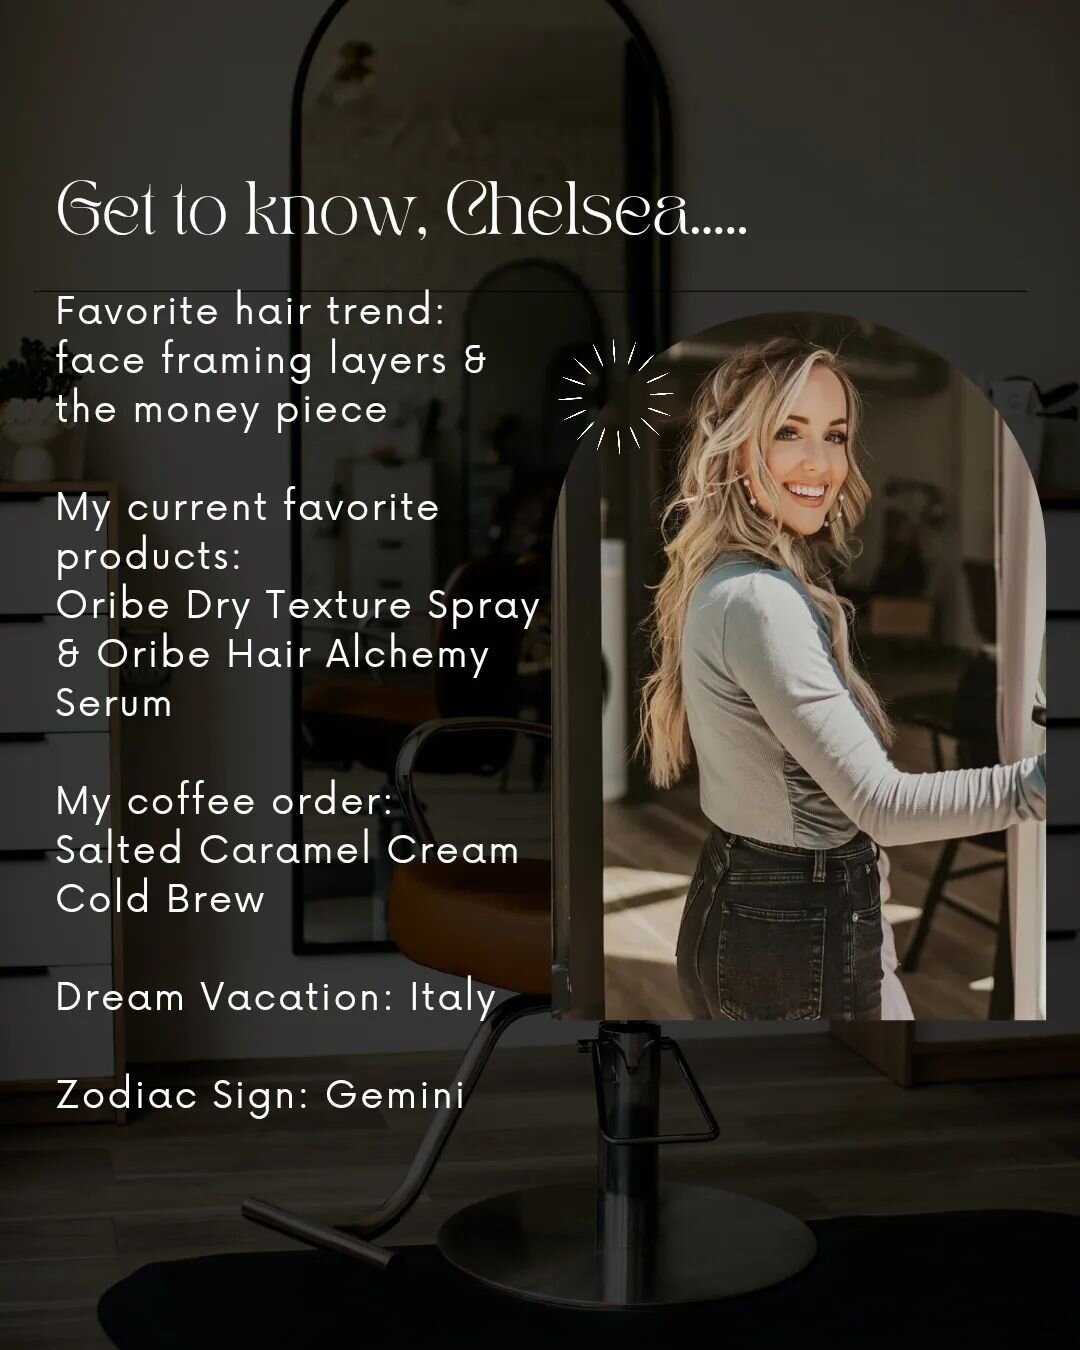 Check out Chelsea's work @chelseahunterhair